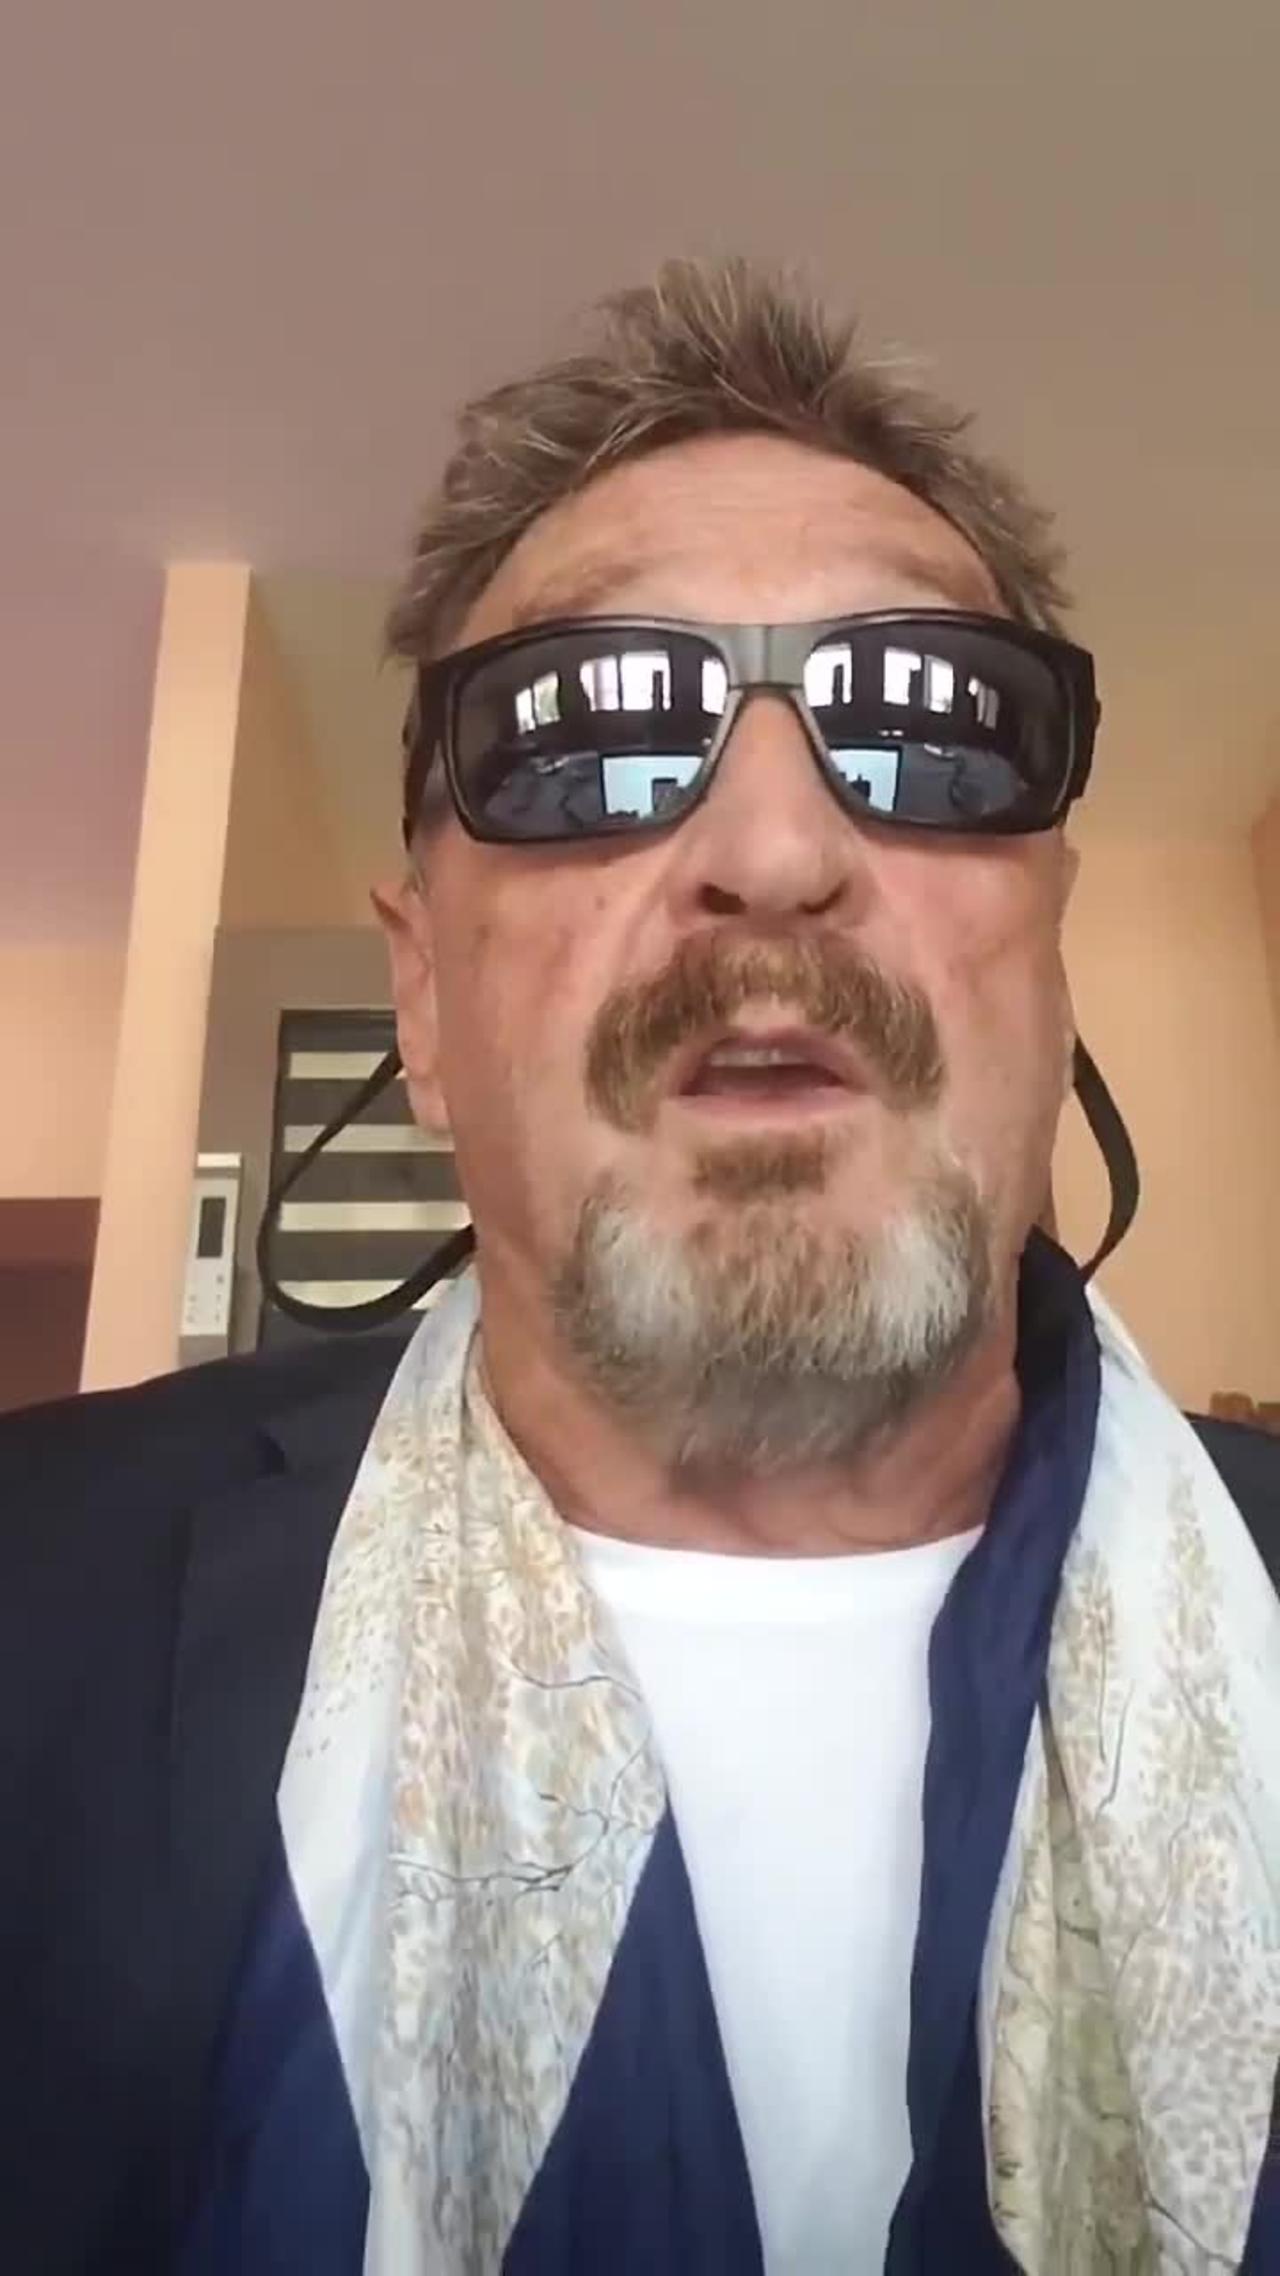 JOHN McAfee HERQ - the real corruption and virus scanner